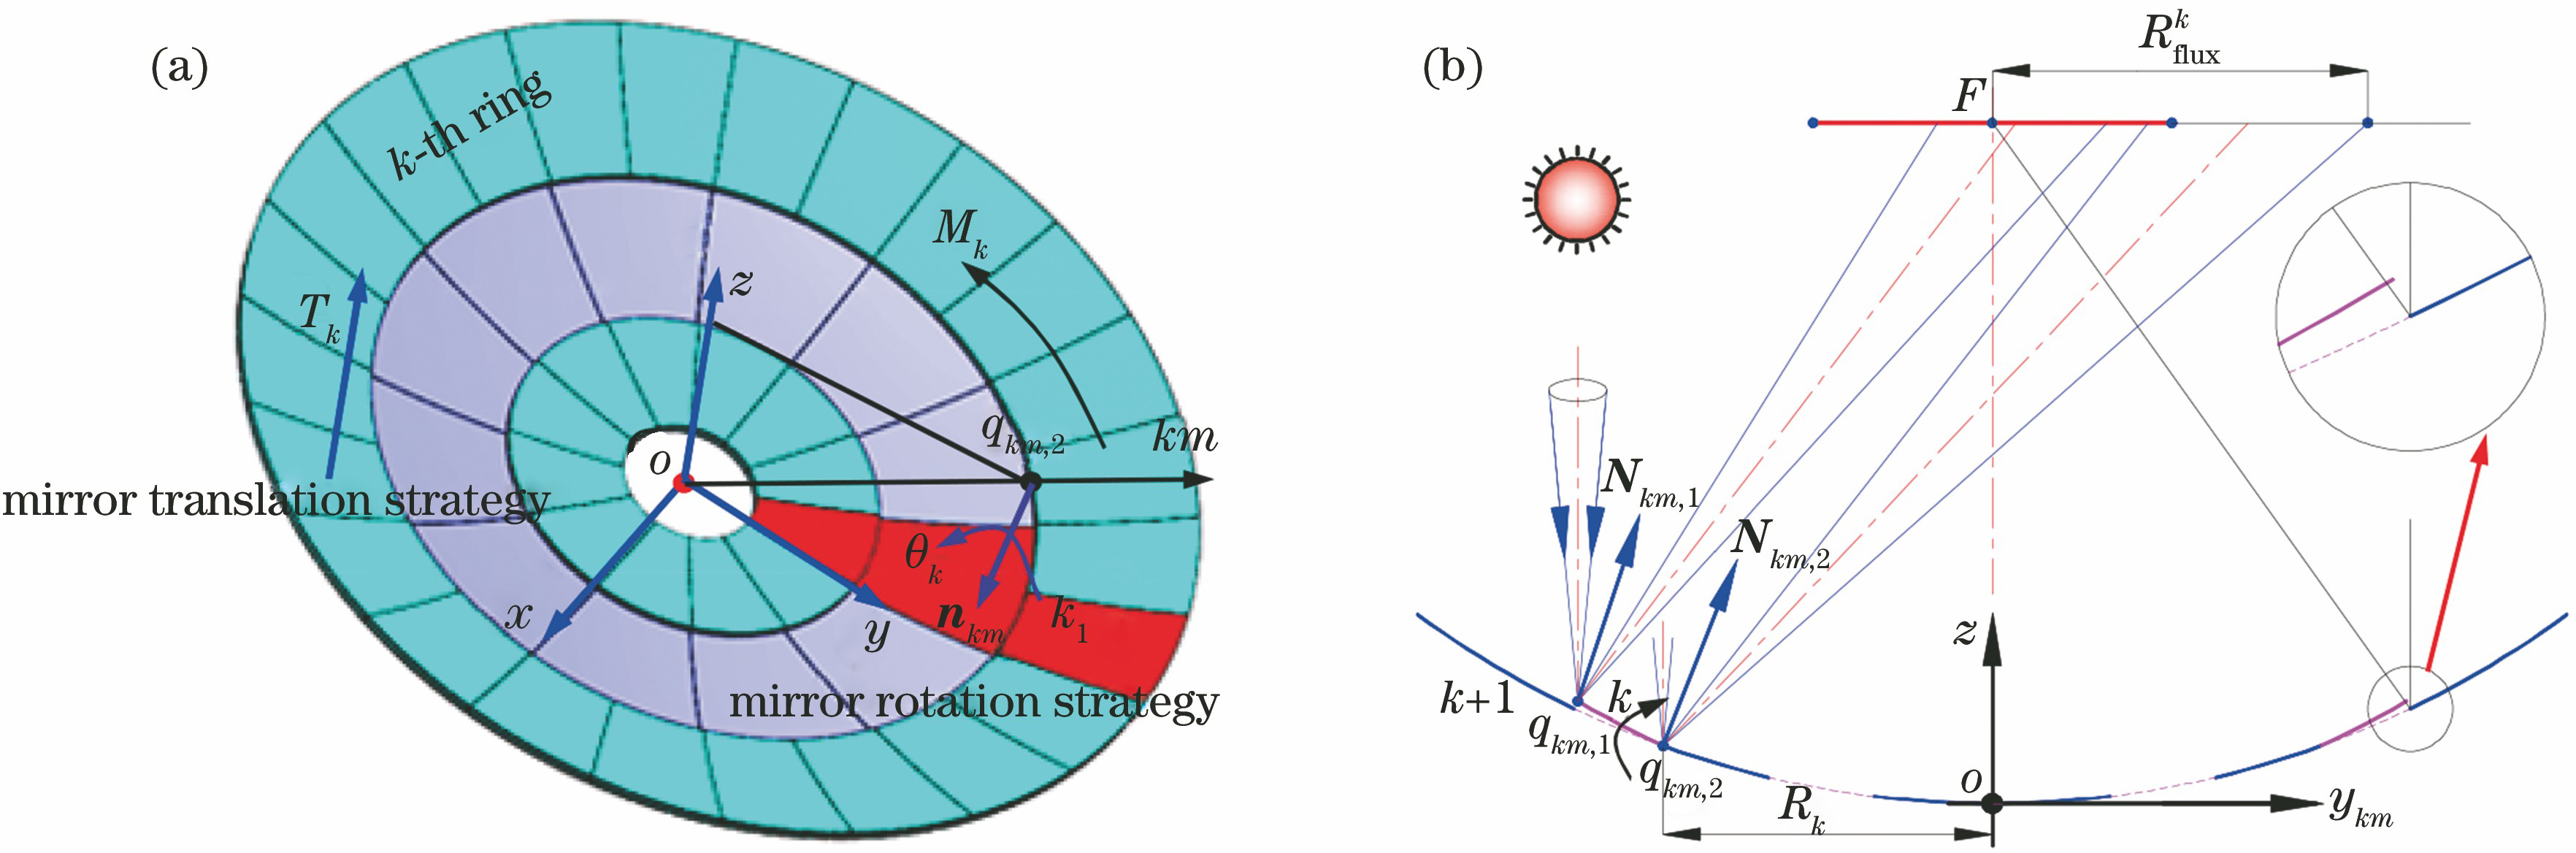 Schematic of mirror rearrangement of parabolic dish concentrator. (a) Mirror rearrangement parameters; (b) ray transmission in symmetrical plane of mirror unit km